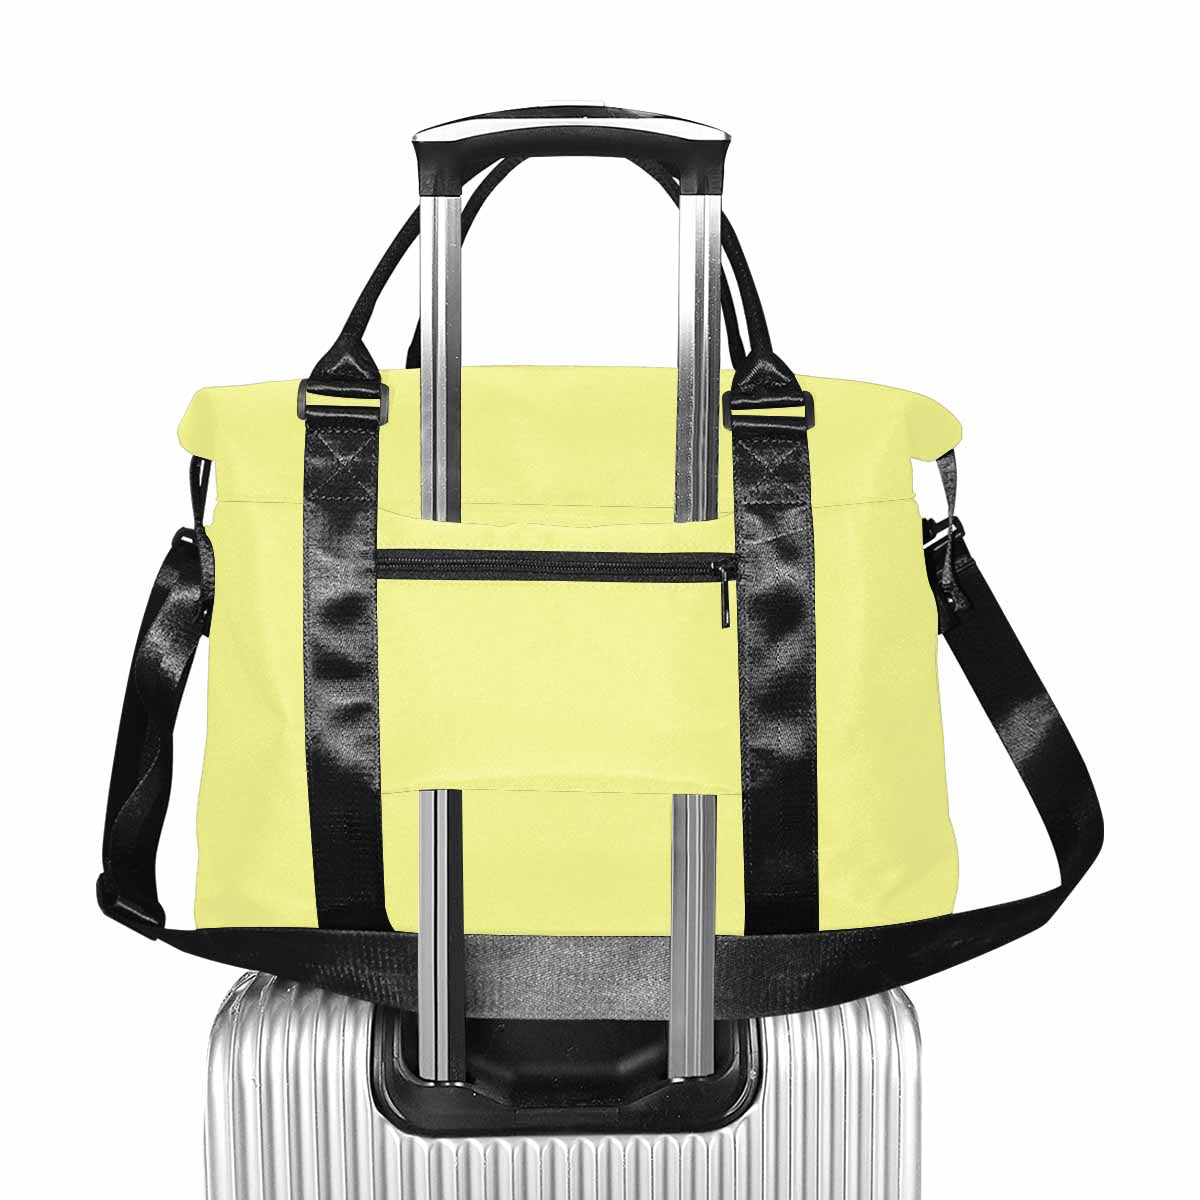 Light Yellow Canvas Carry On